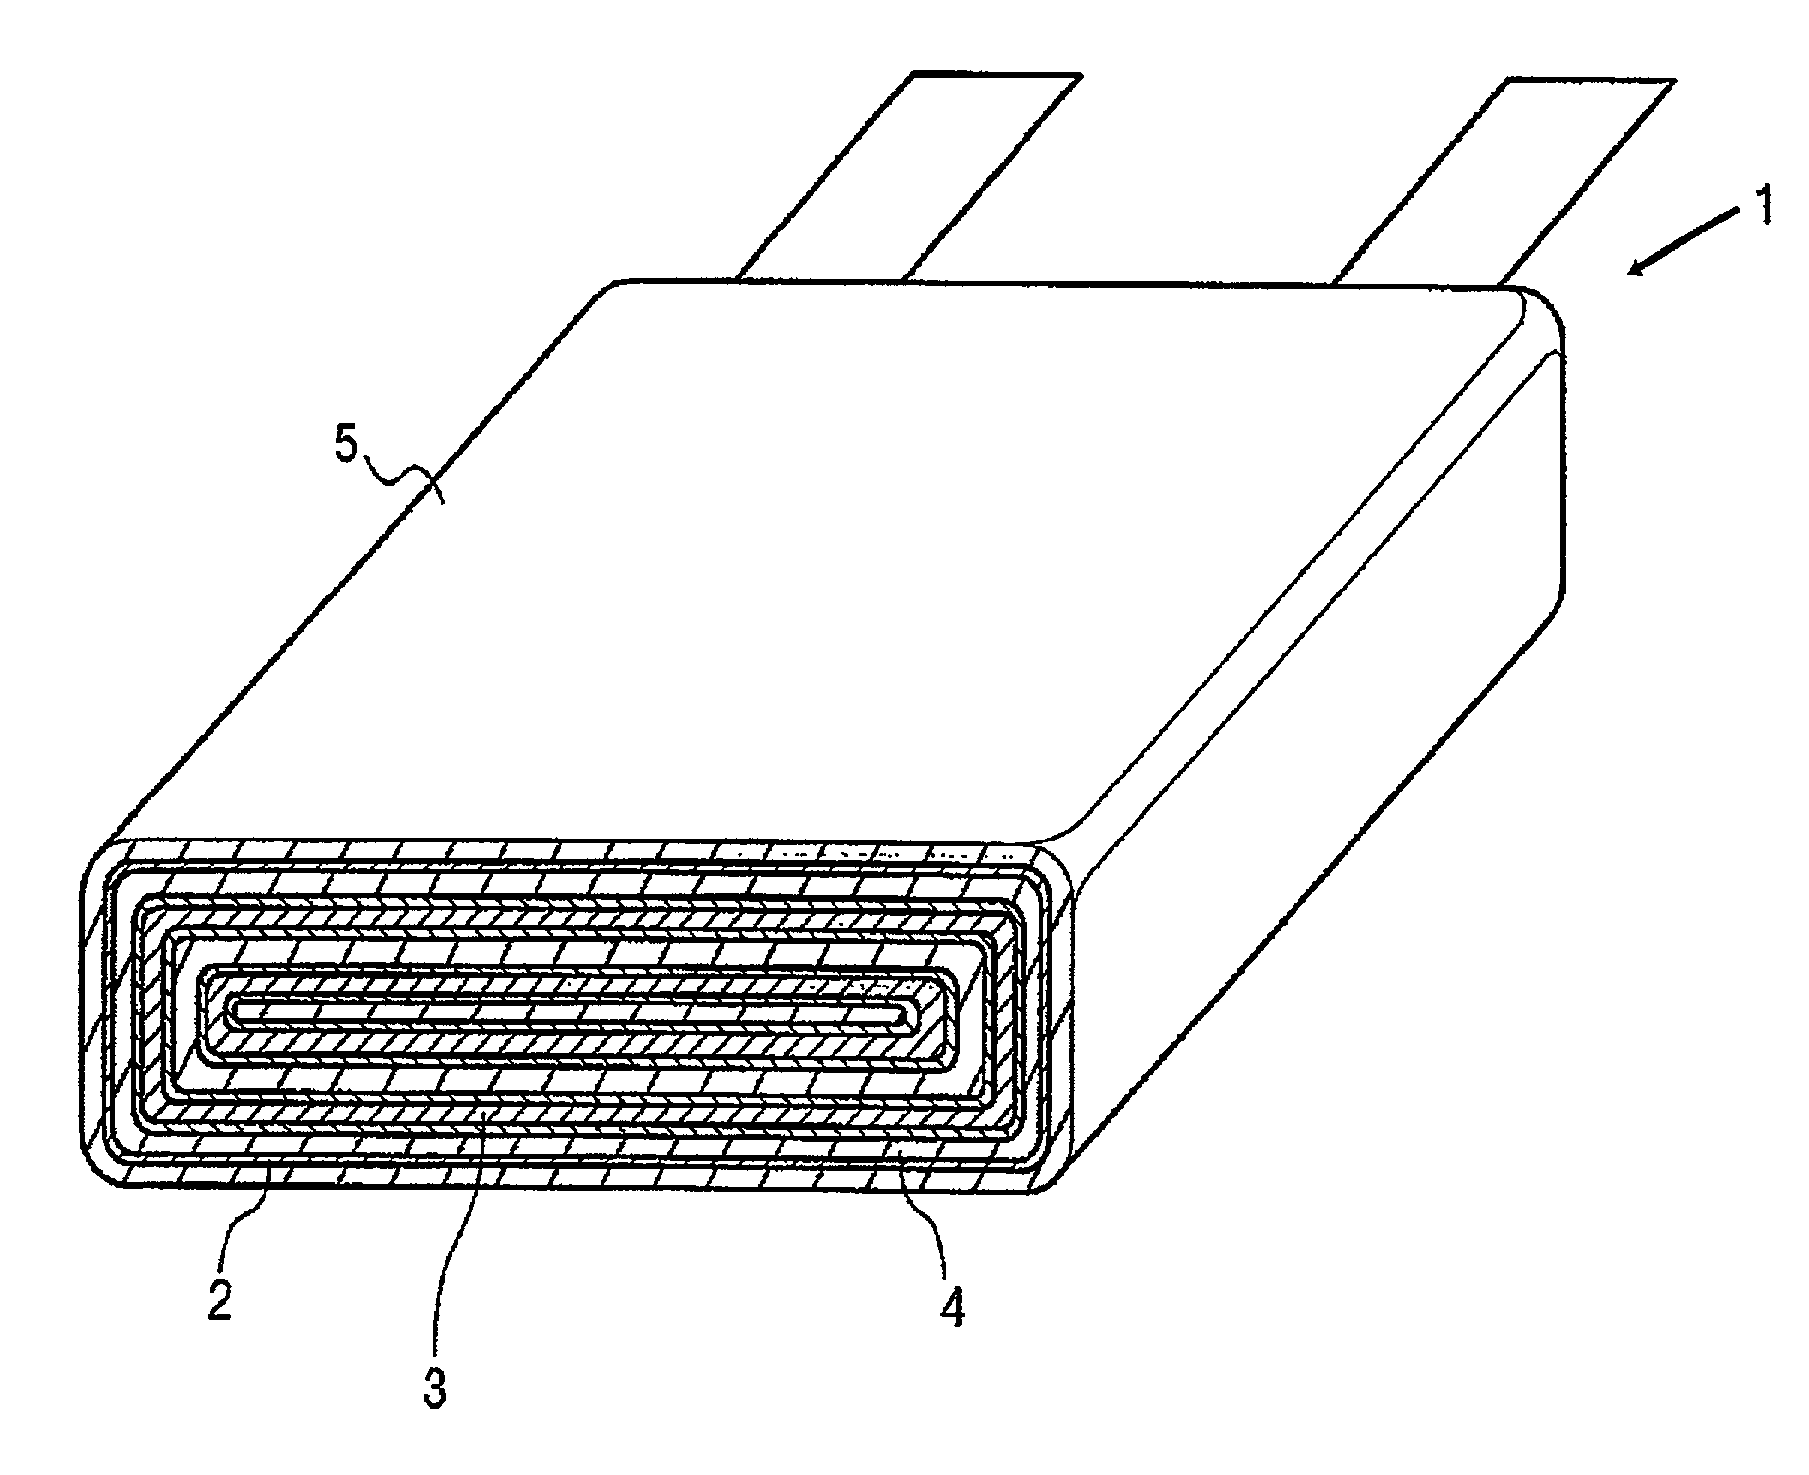 Electrolyte for lithium-sulfur batteries and lithium-sulfur batteries comprising the same